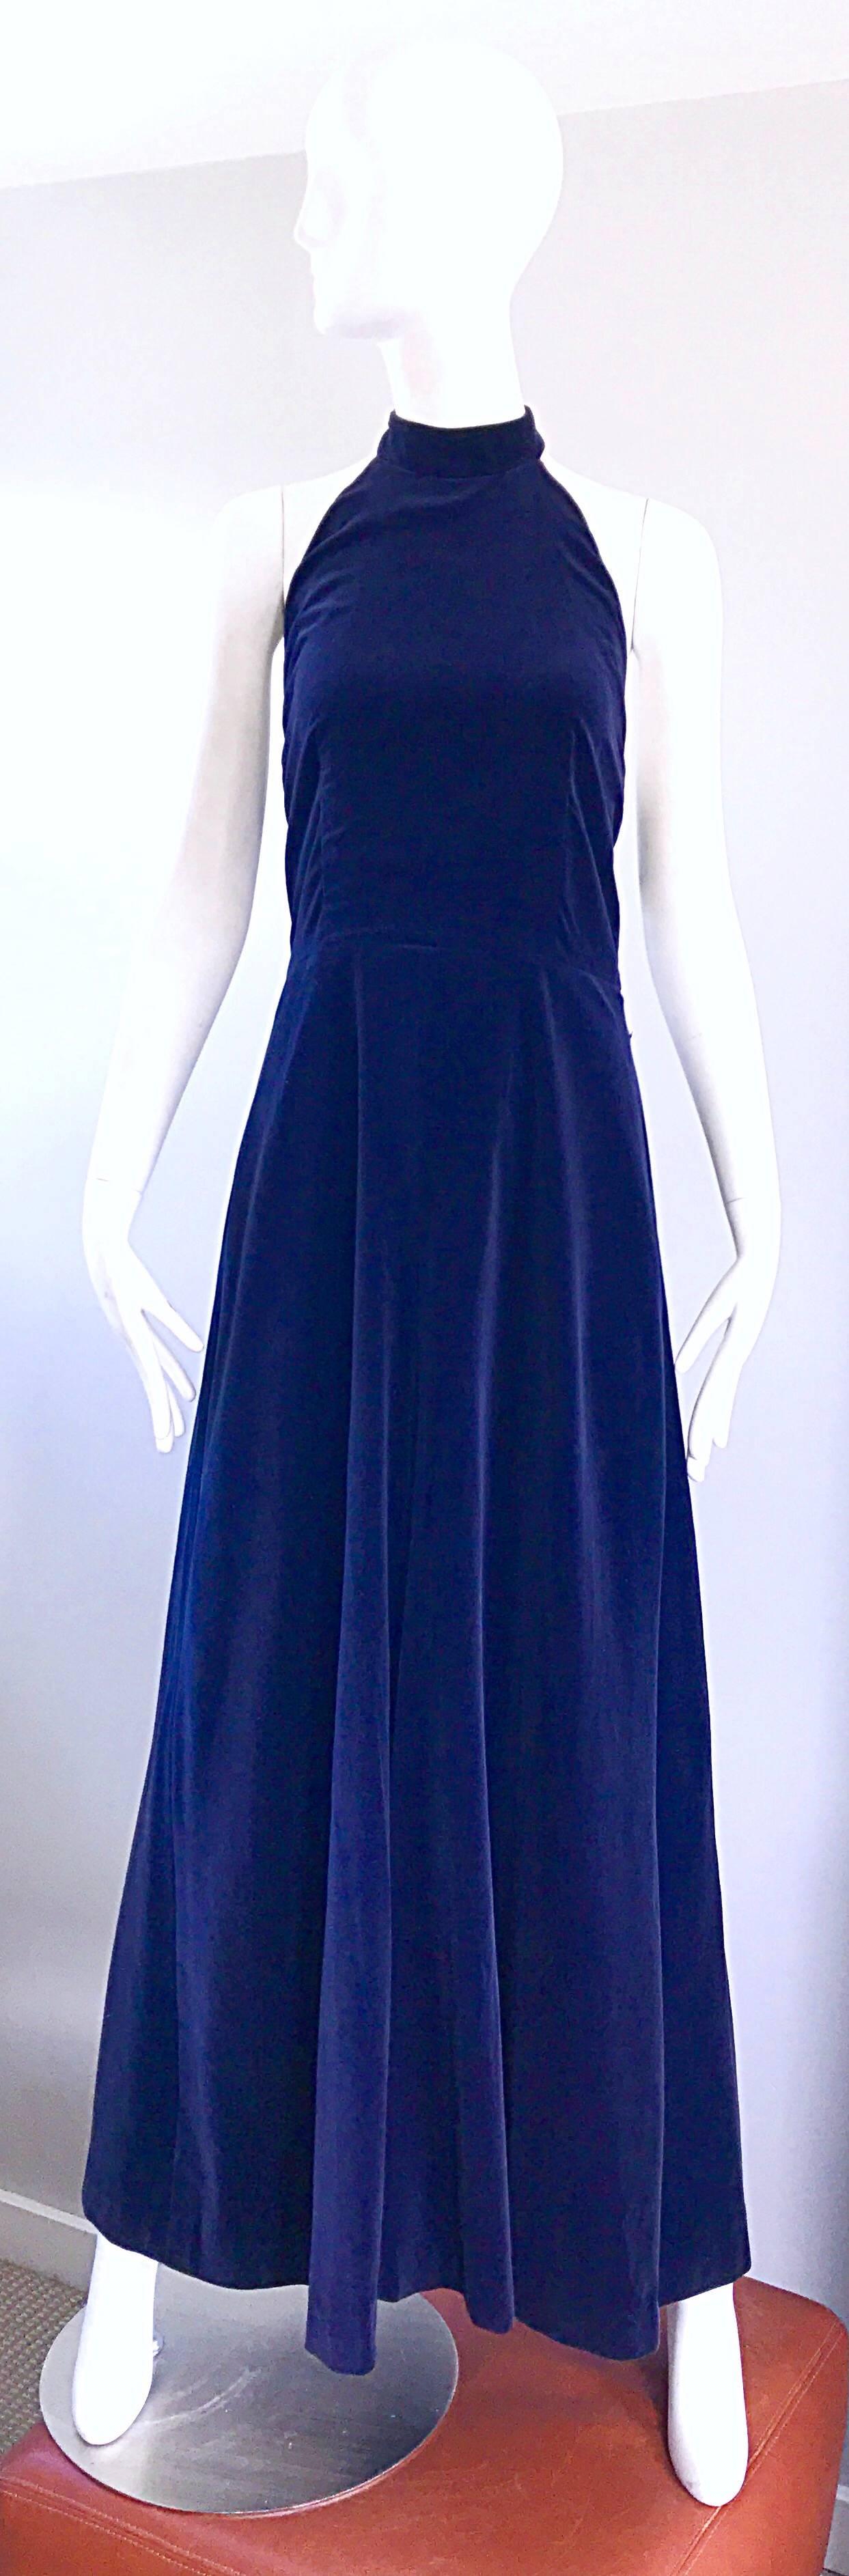 Brilliant 1970s YVES SAINT LAURENT 'Rive Gauche' navy blue velvet halter maxi dress / gown! Features a fitted bodice, with a flattering and forgiving full skirt. Hidden zipper up the back with hidden hook-and-eye closures at top back neck. Fully